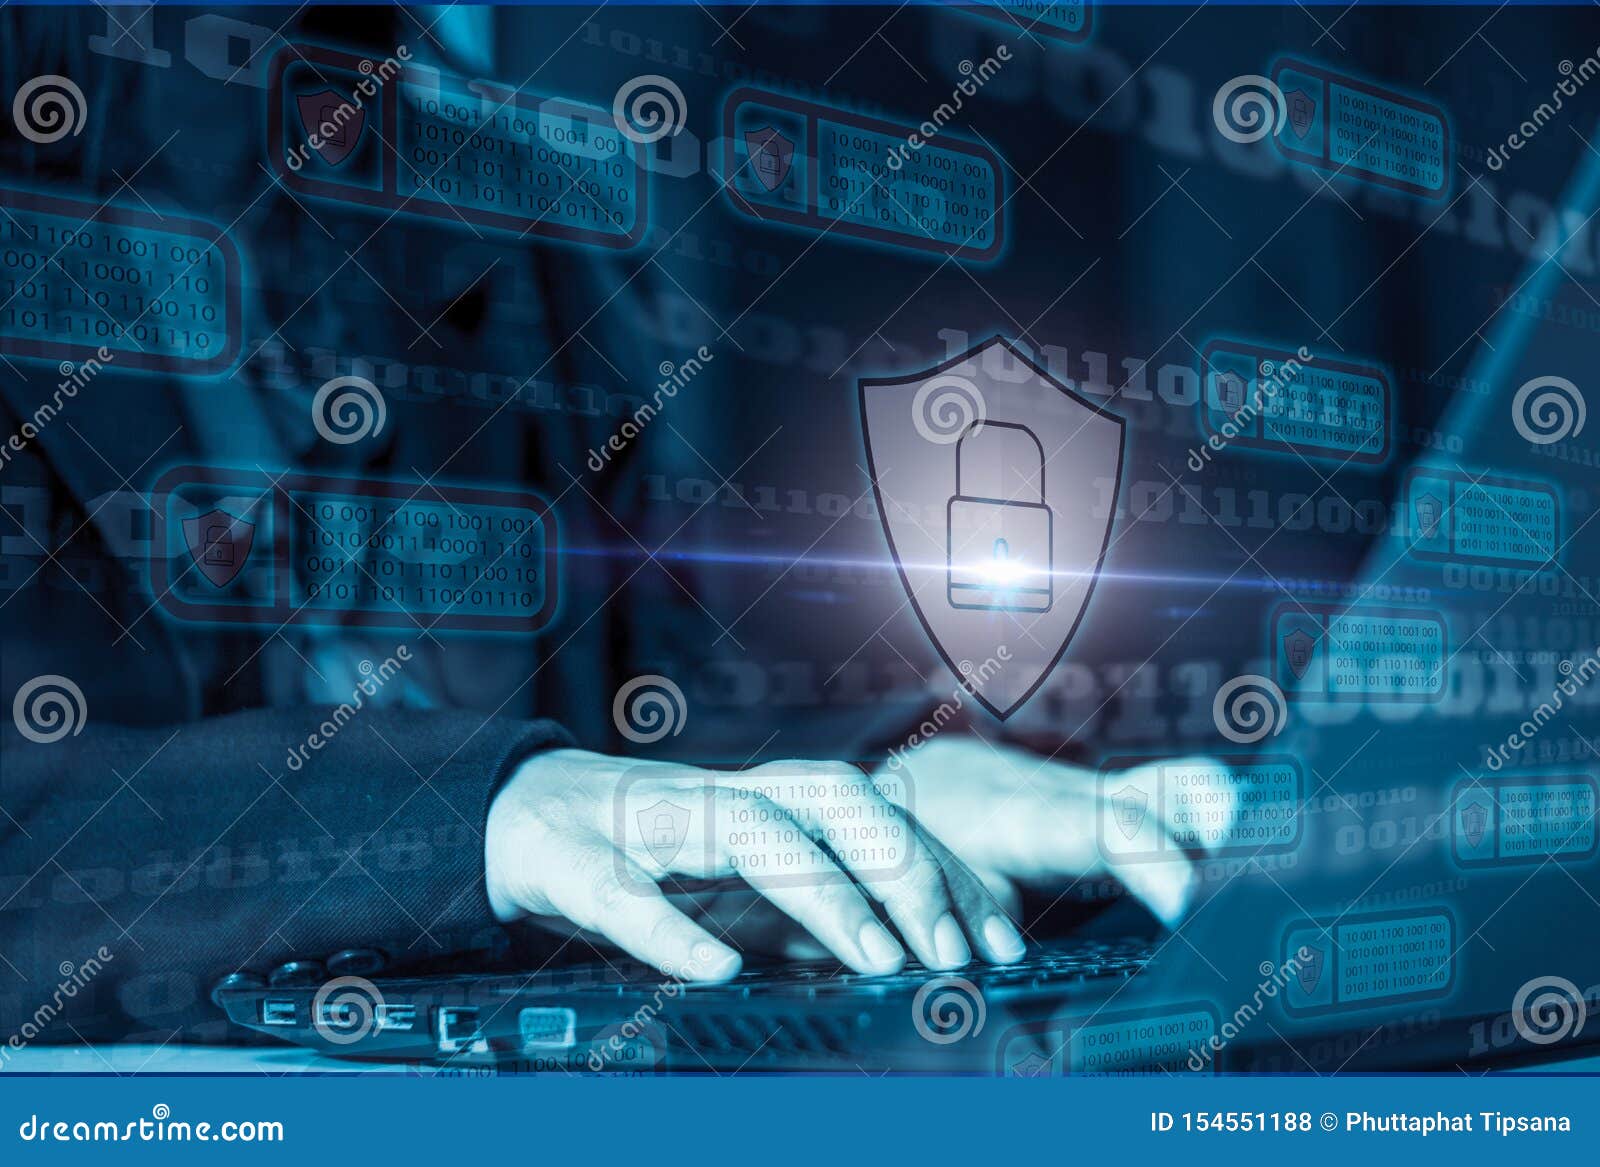 hacker attack laptop computer background icon binary shield padlock concept preventing website attacks keeping 154551188